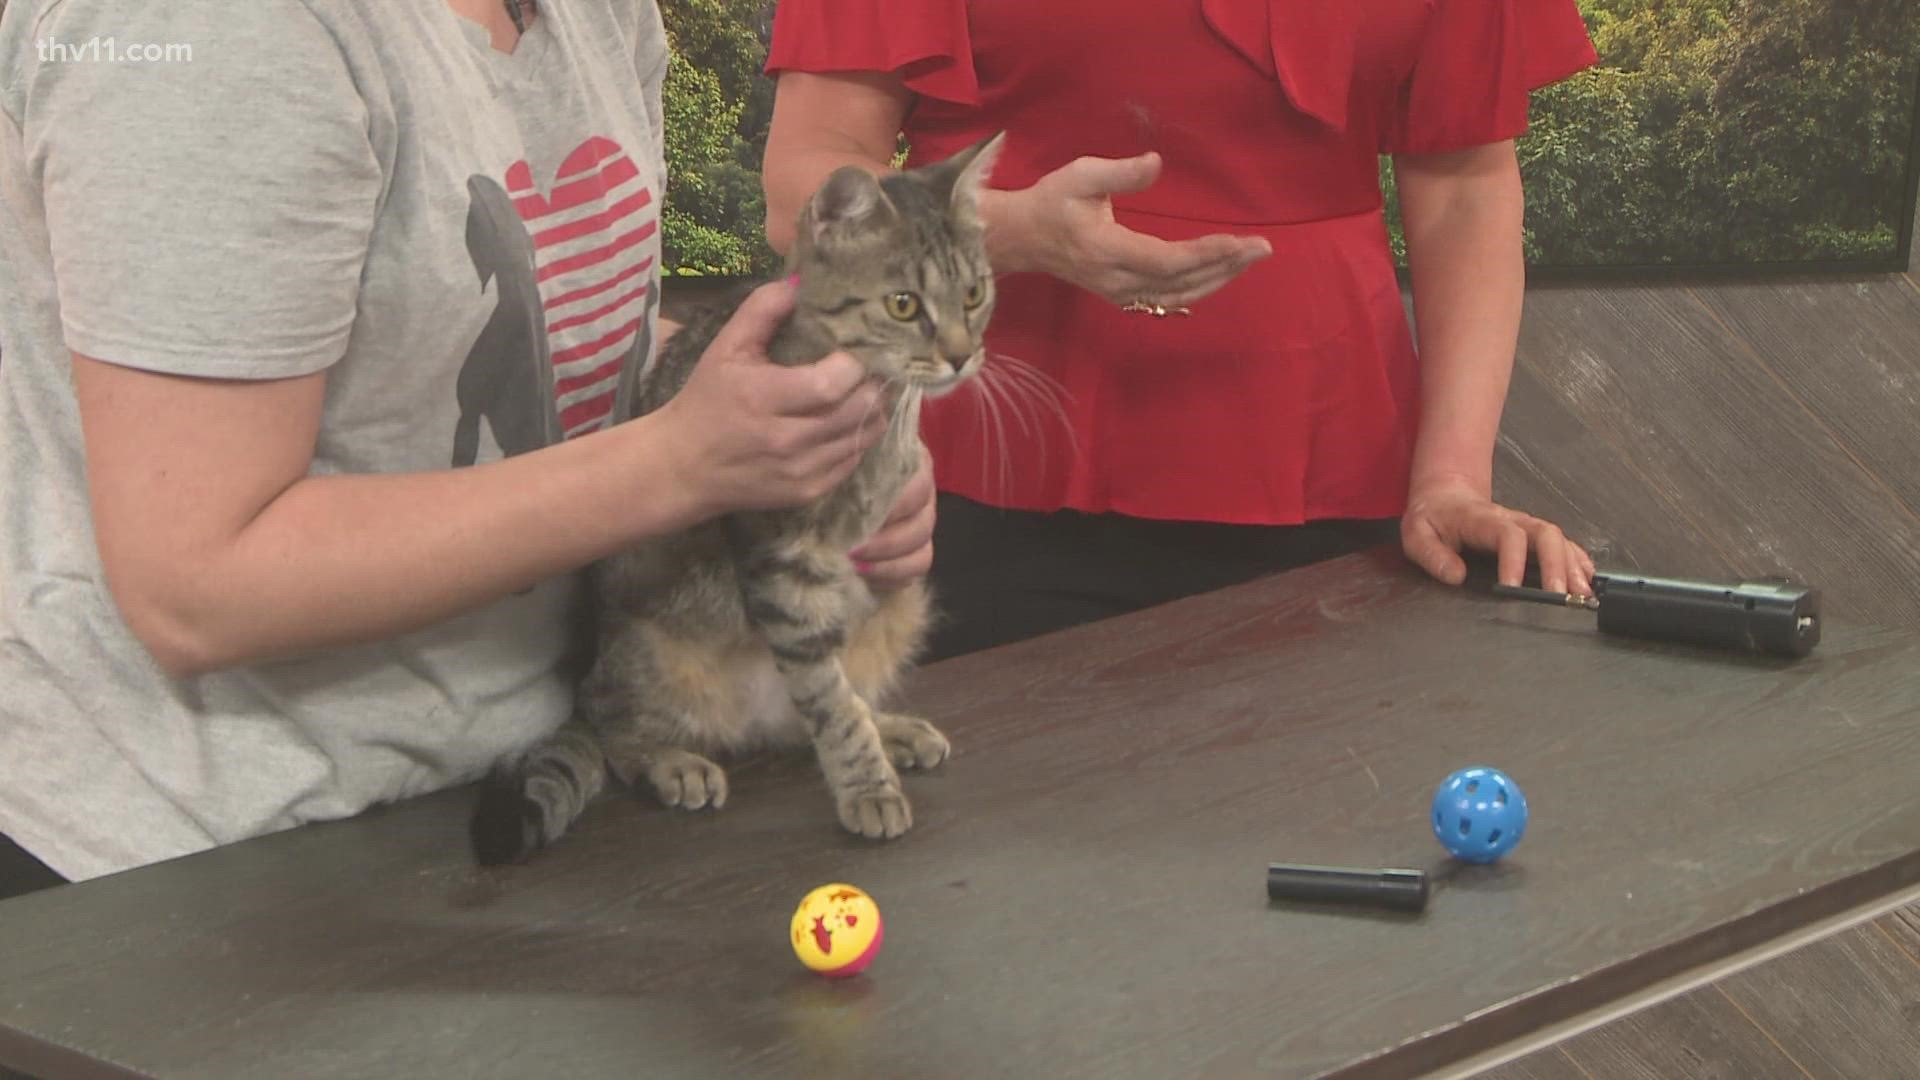 Betsy Robb with The Little Rock Animal Village is here with Sassy! A reminder, they will be closed Memorial Day weekend.